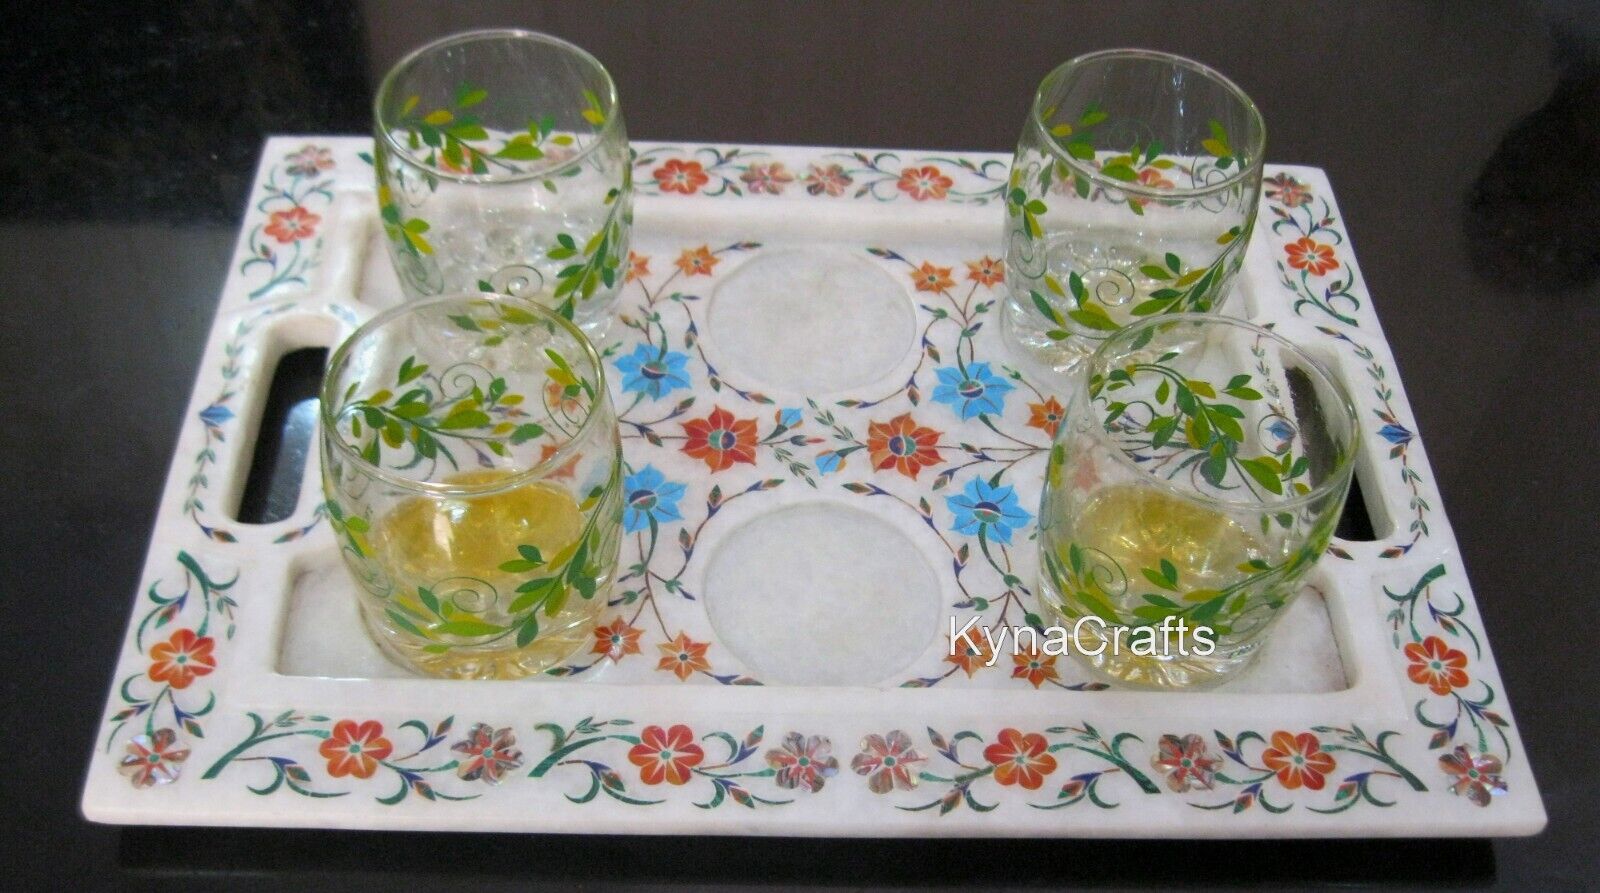 10x14 Inches White Marble Serving Tray Floral Pattern Inlay Work Decorative Tray